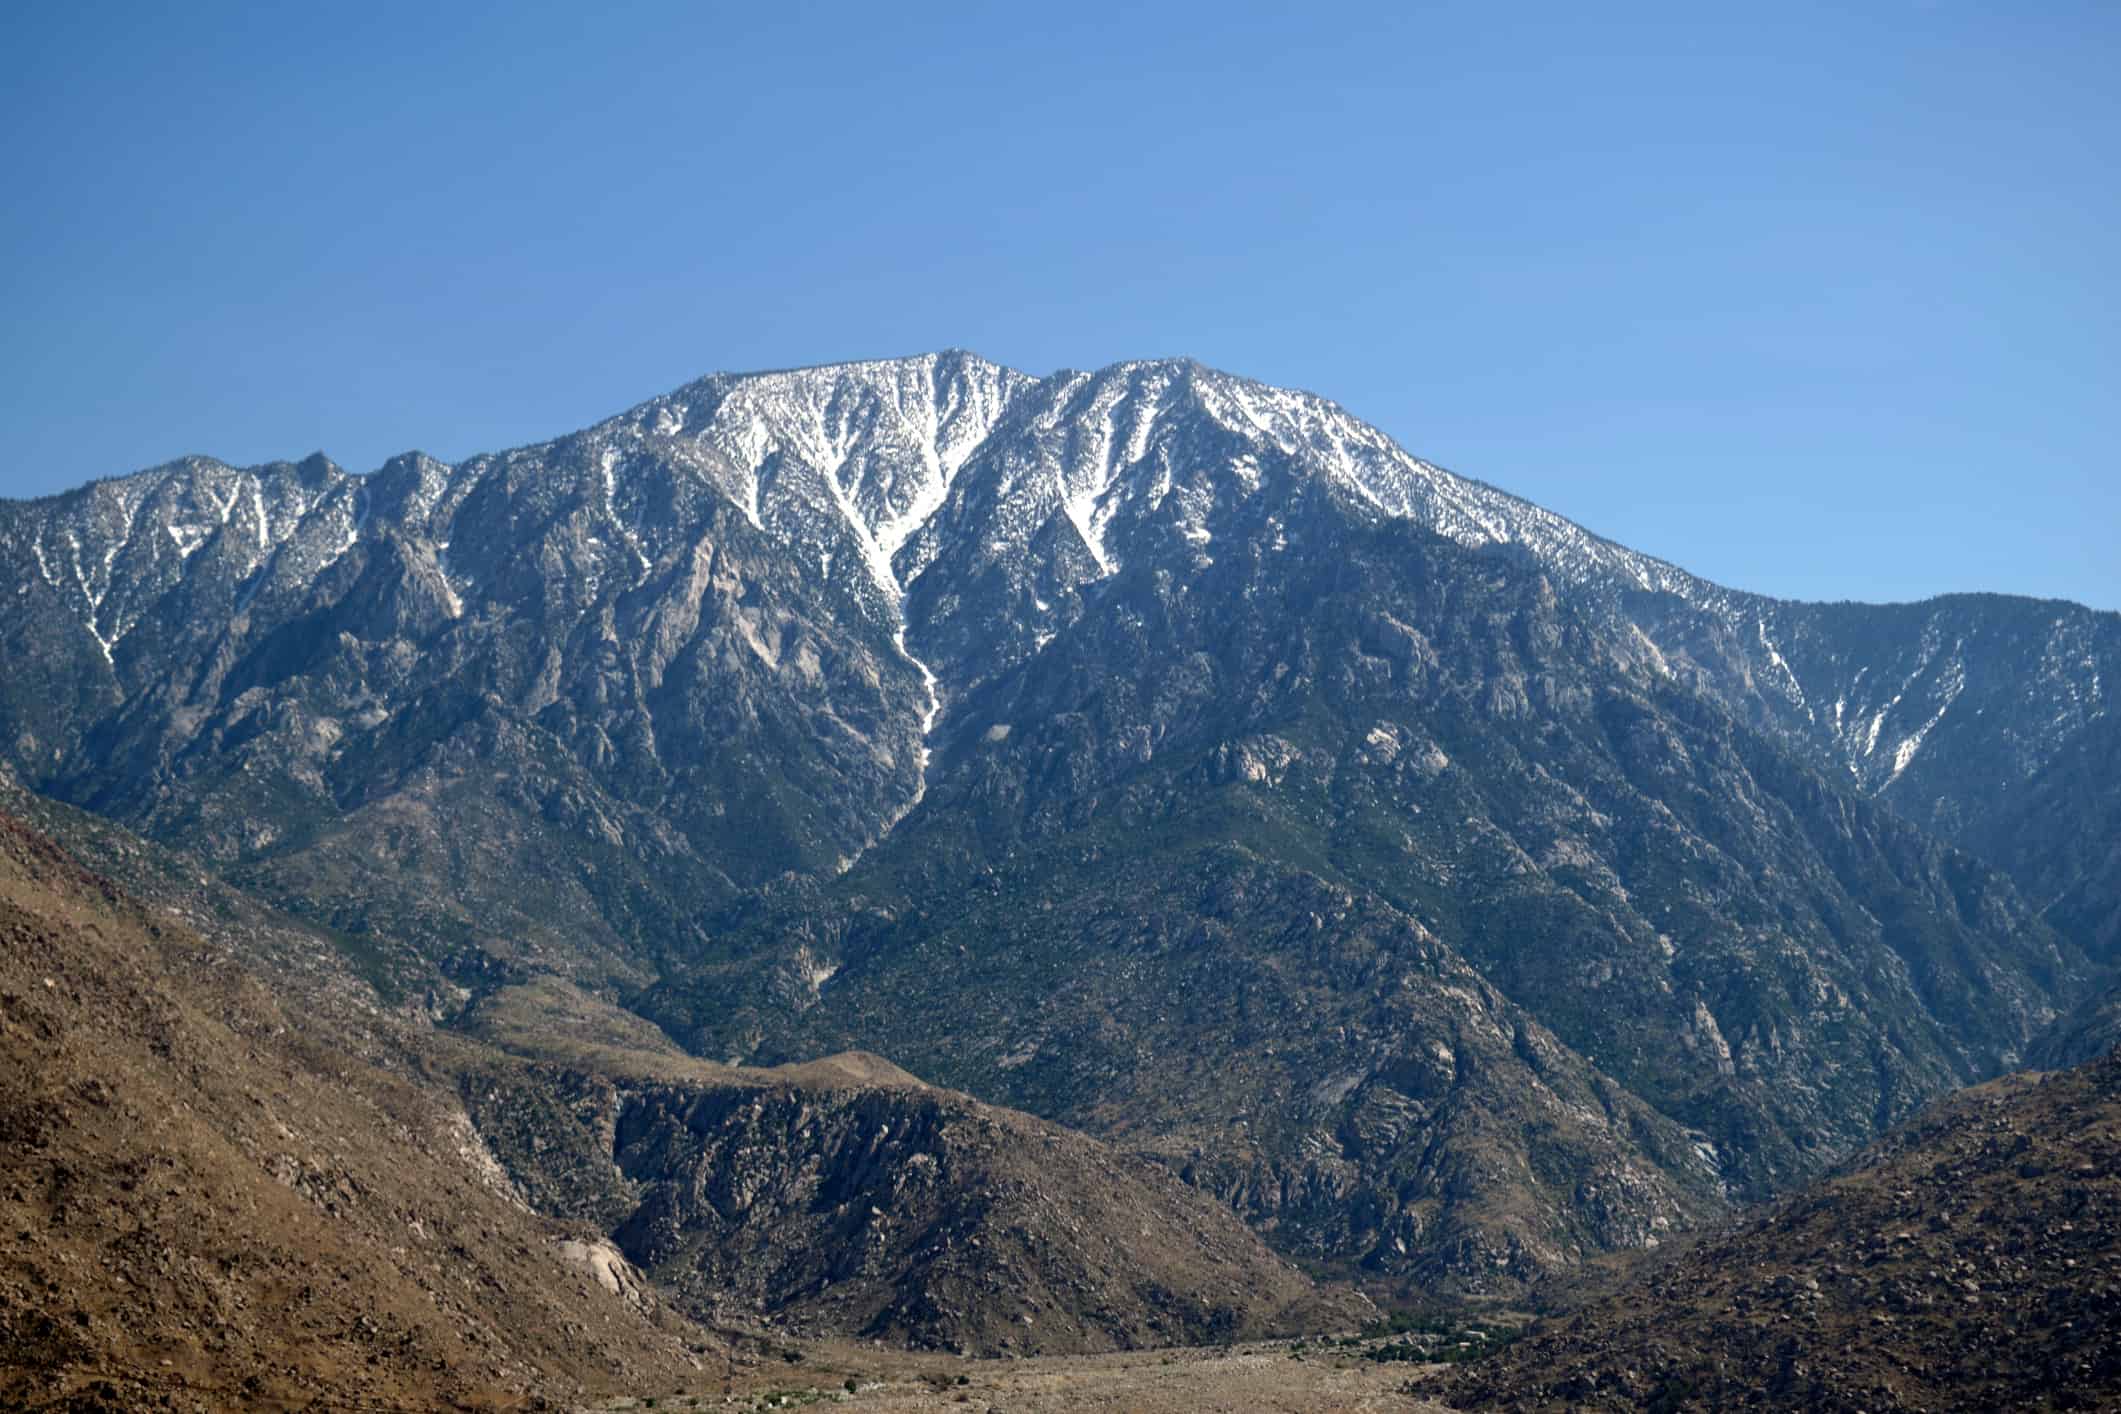 A Sunny Day in the San Jacinto Mountains